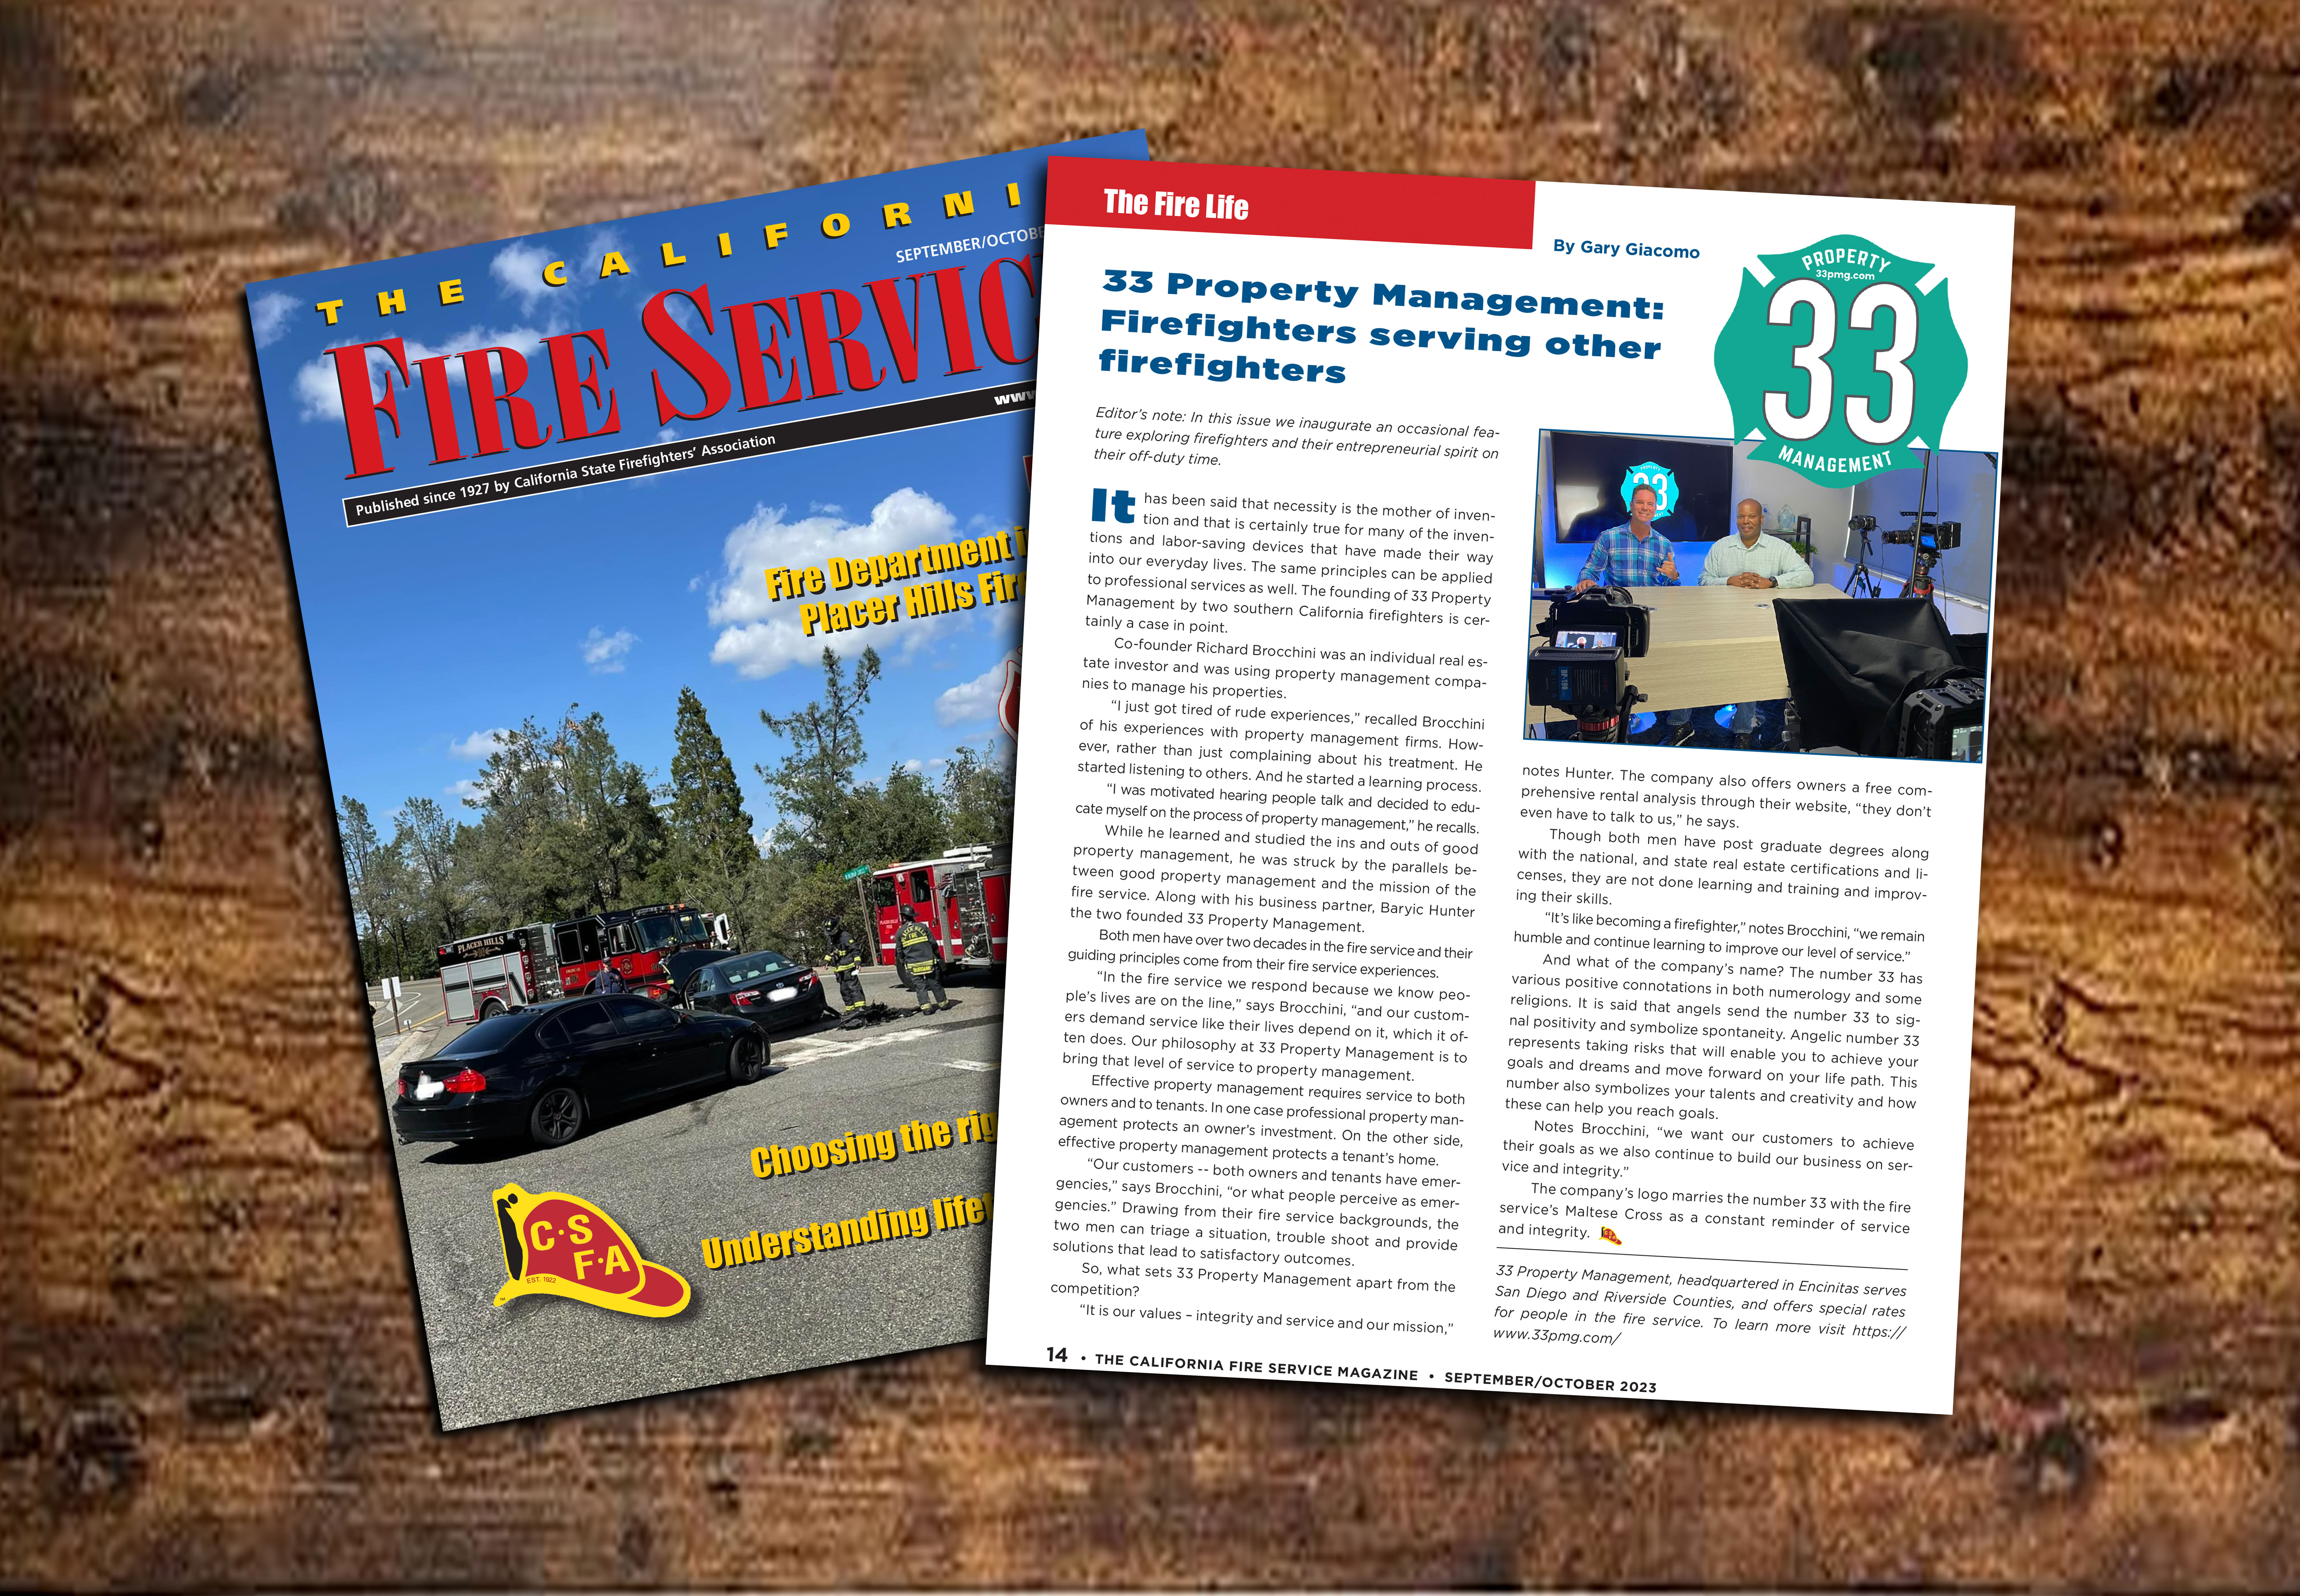 The California Fire Service Magazine (CFSM) October Issue Featured 33 Property Management Group where the company was featured as a Firefighter owned company.